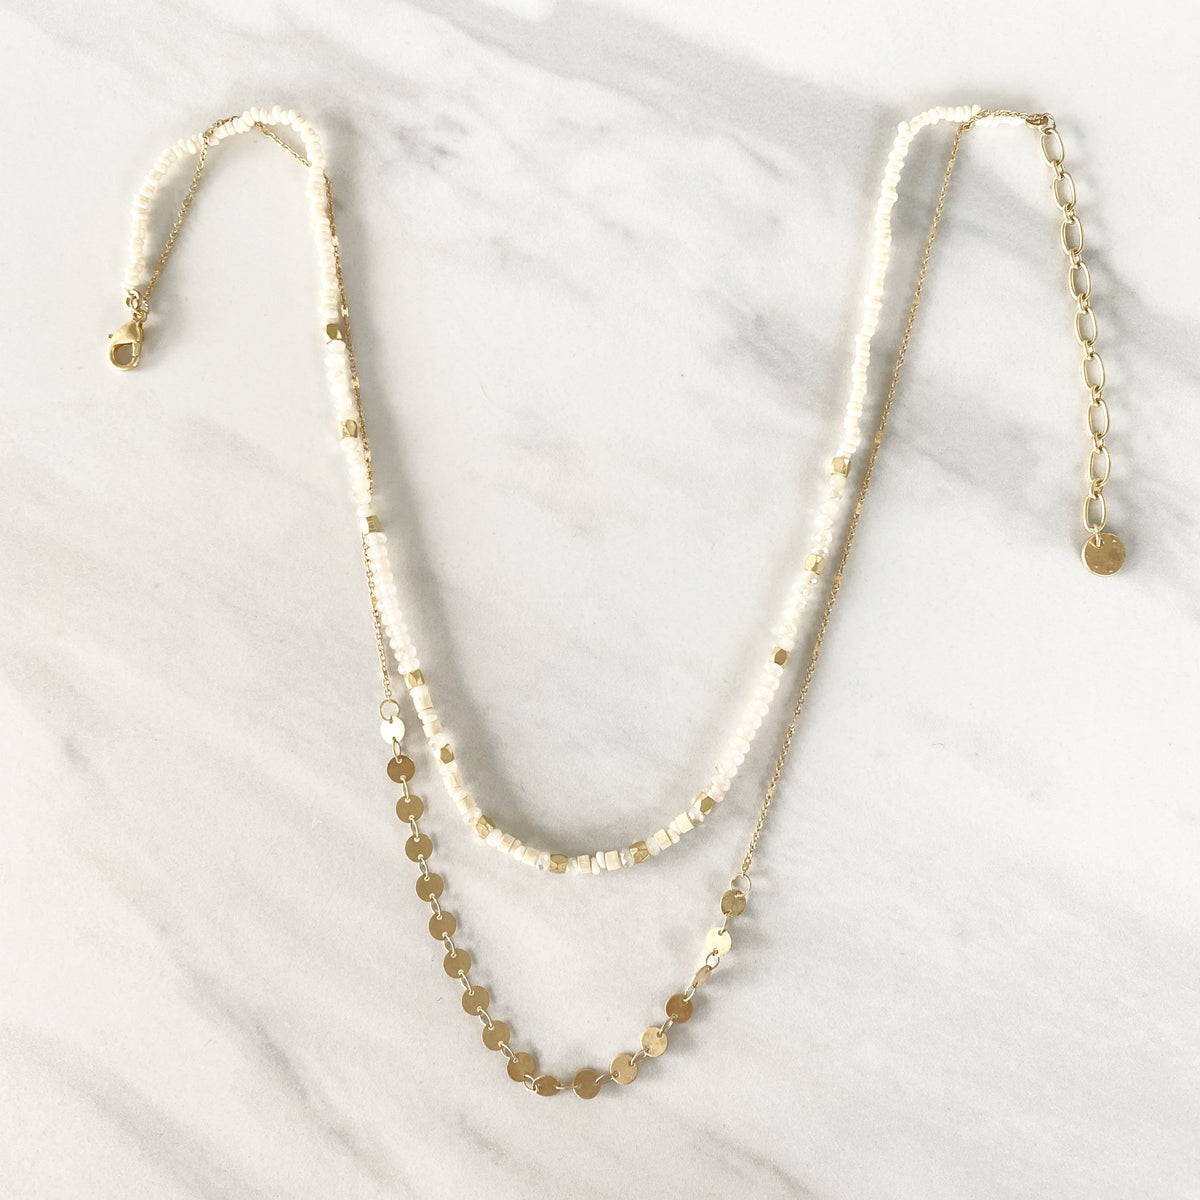 Second Chance Gold Layered Necklace in Ivory - Dainty Hooligan